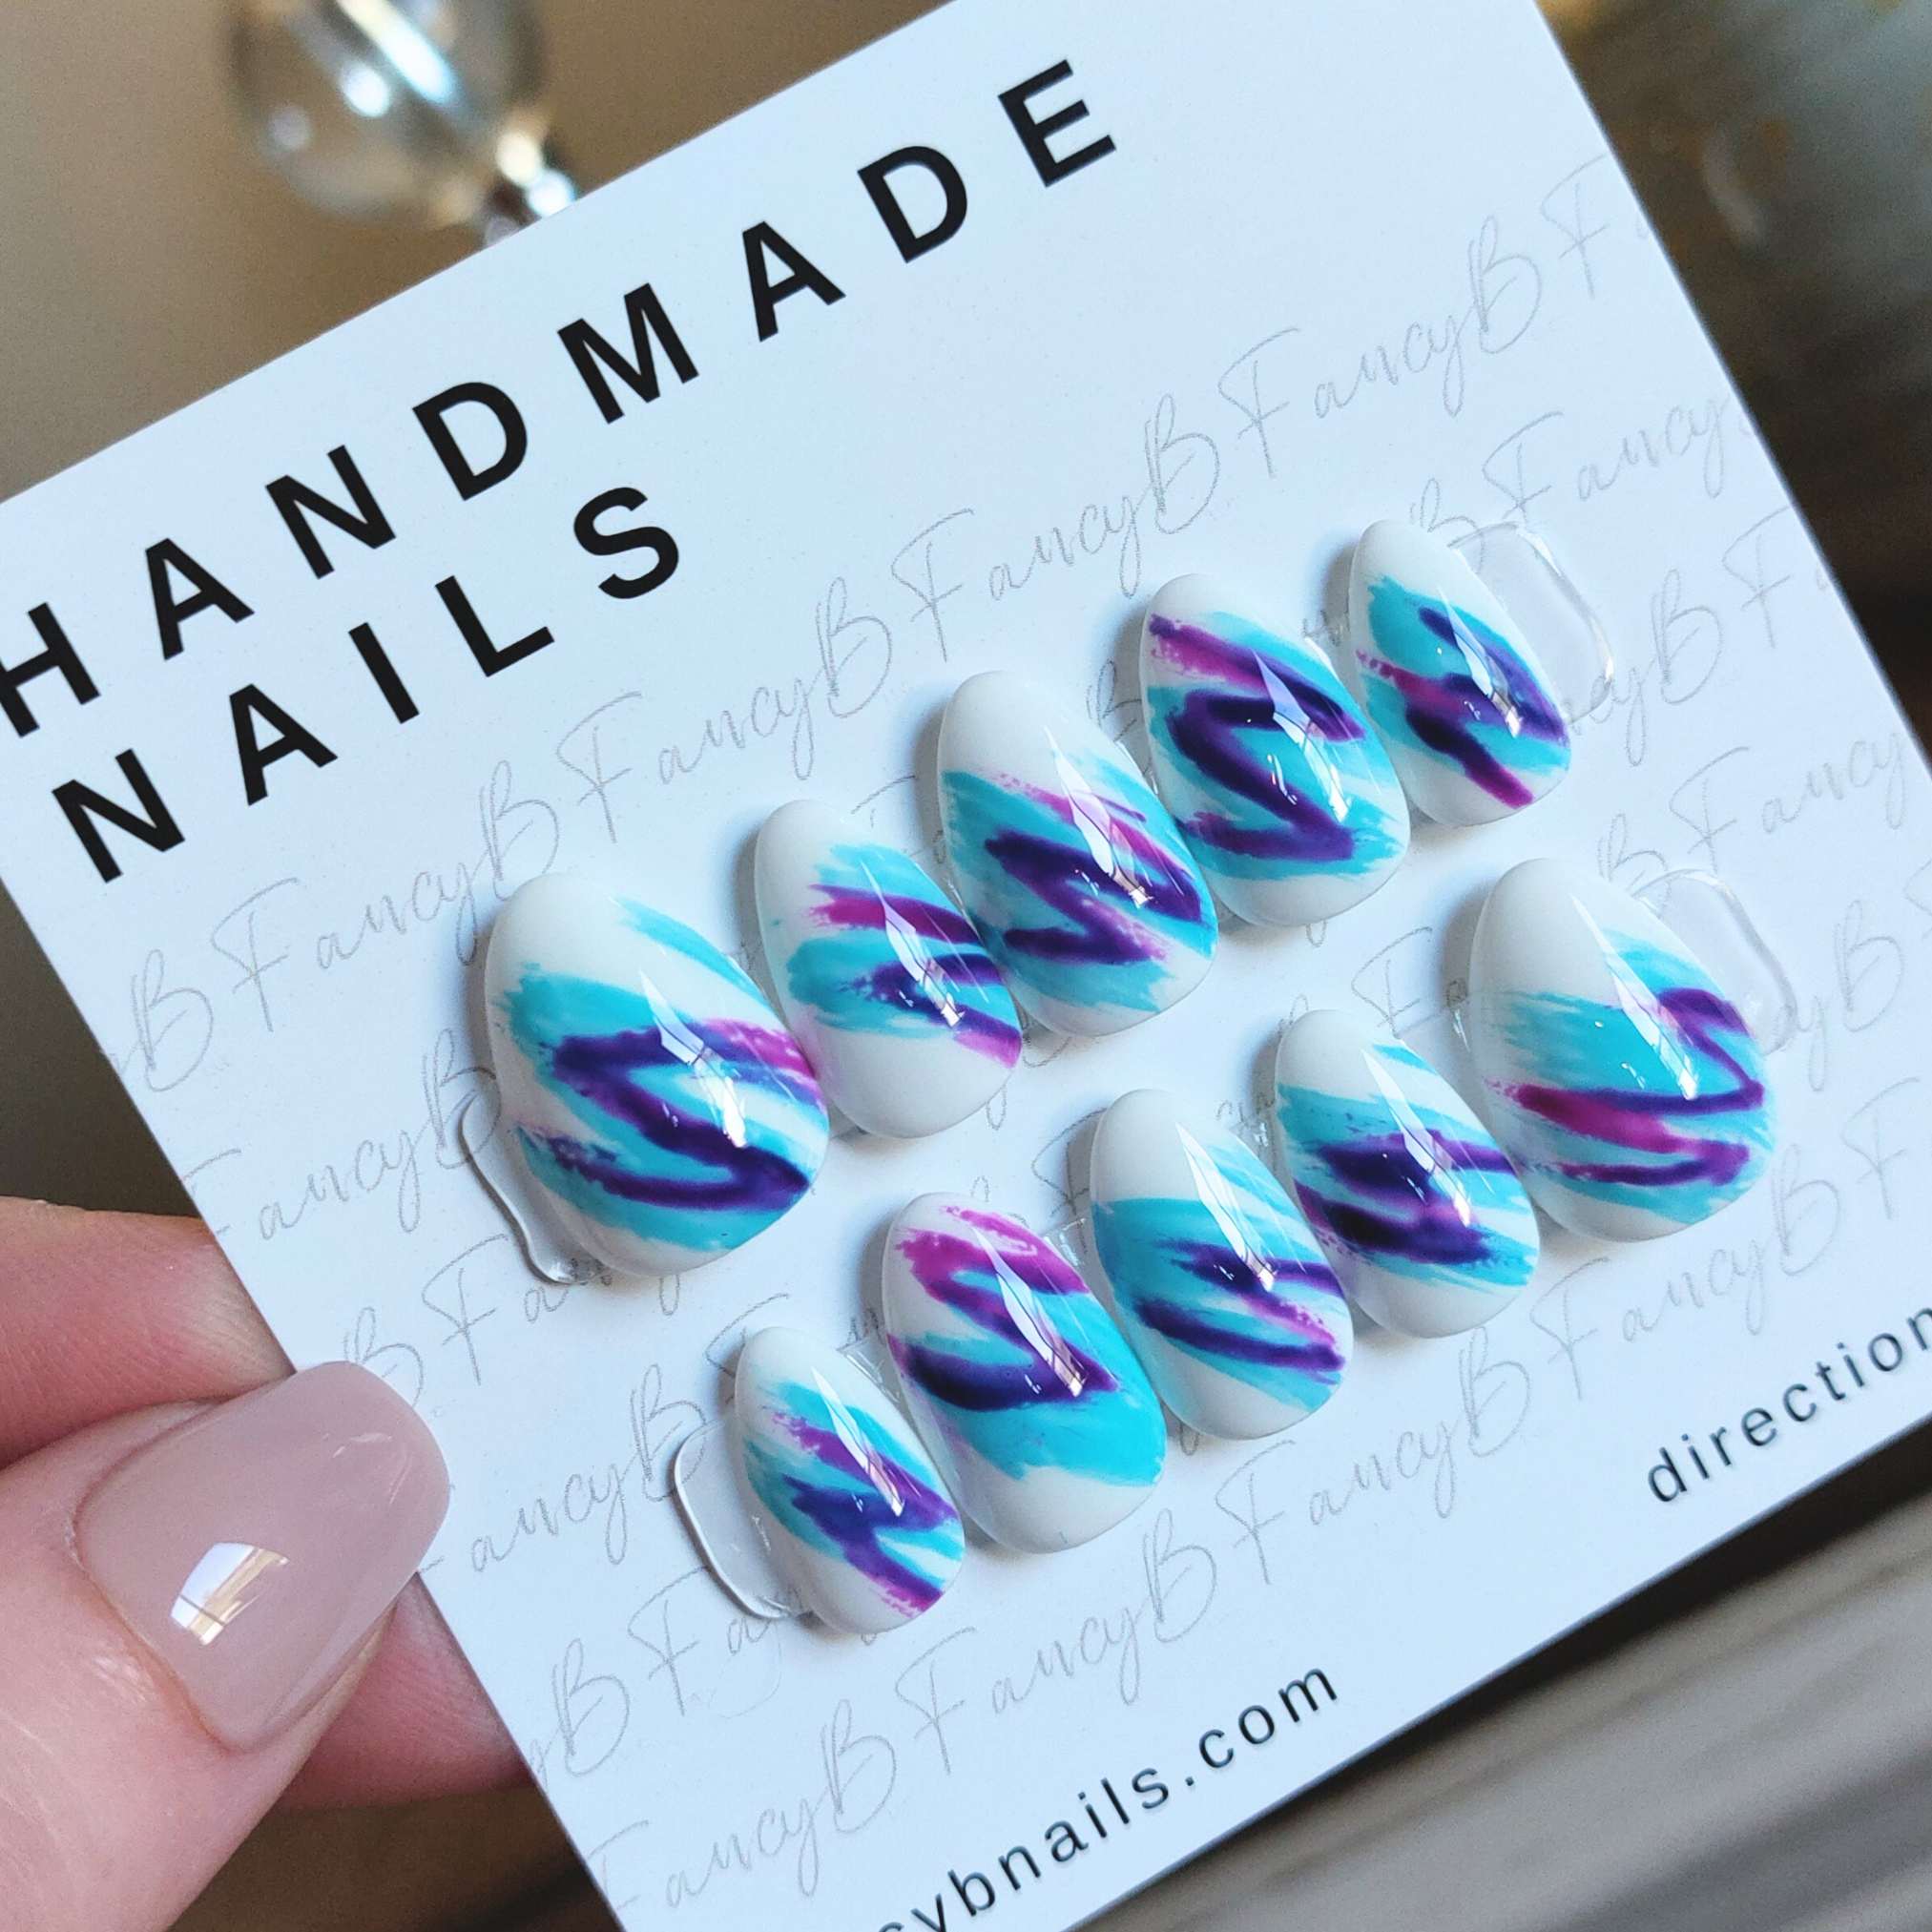 custom dixie cup nails, 80s style press on nails with solo cup design teal and purple on short oval shape from fancyb press on nails